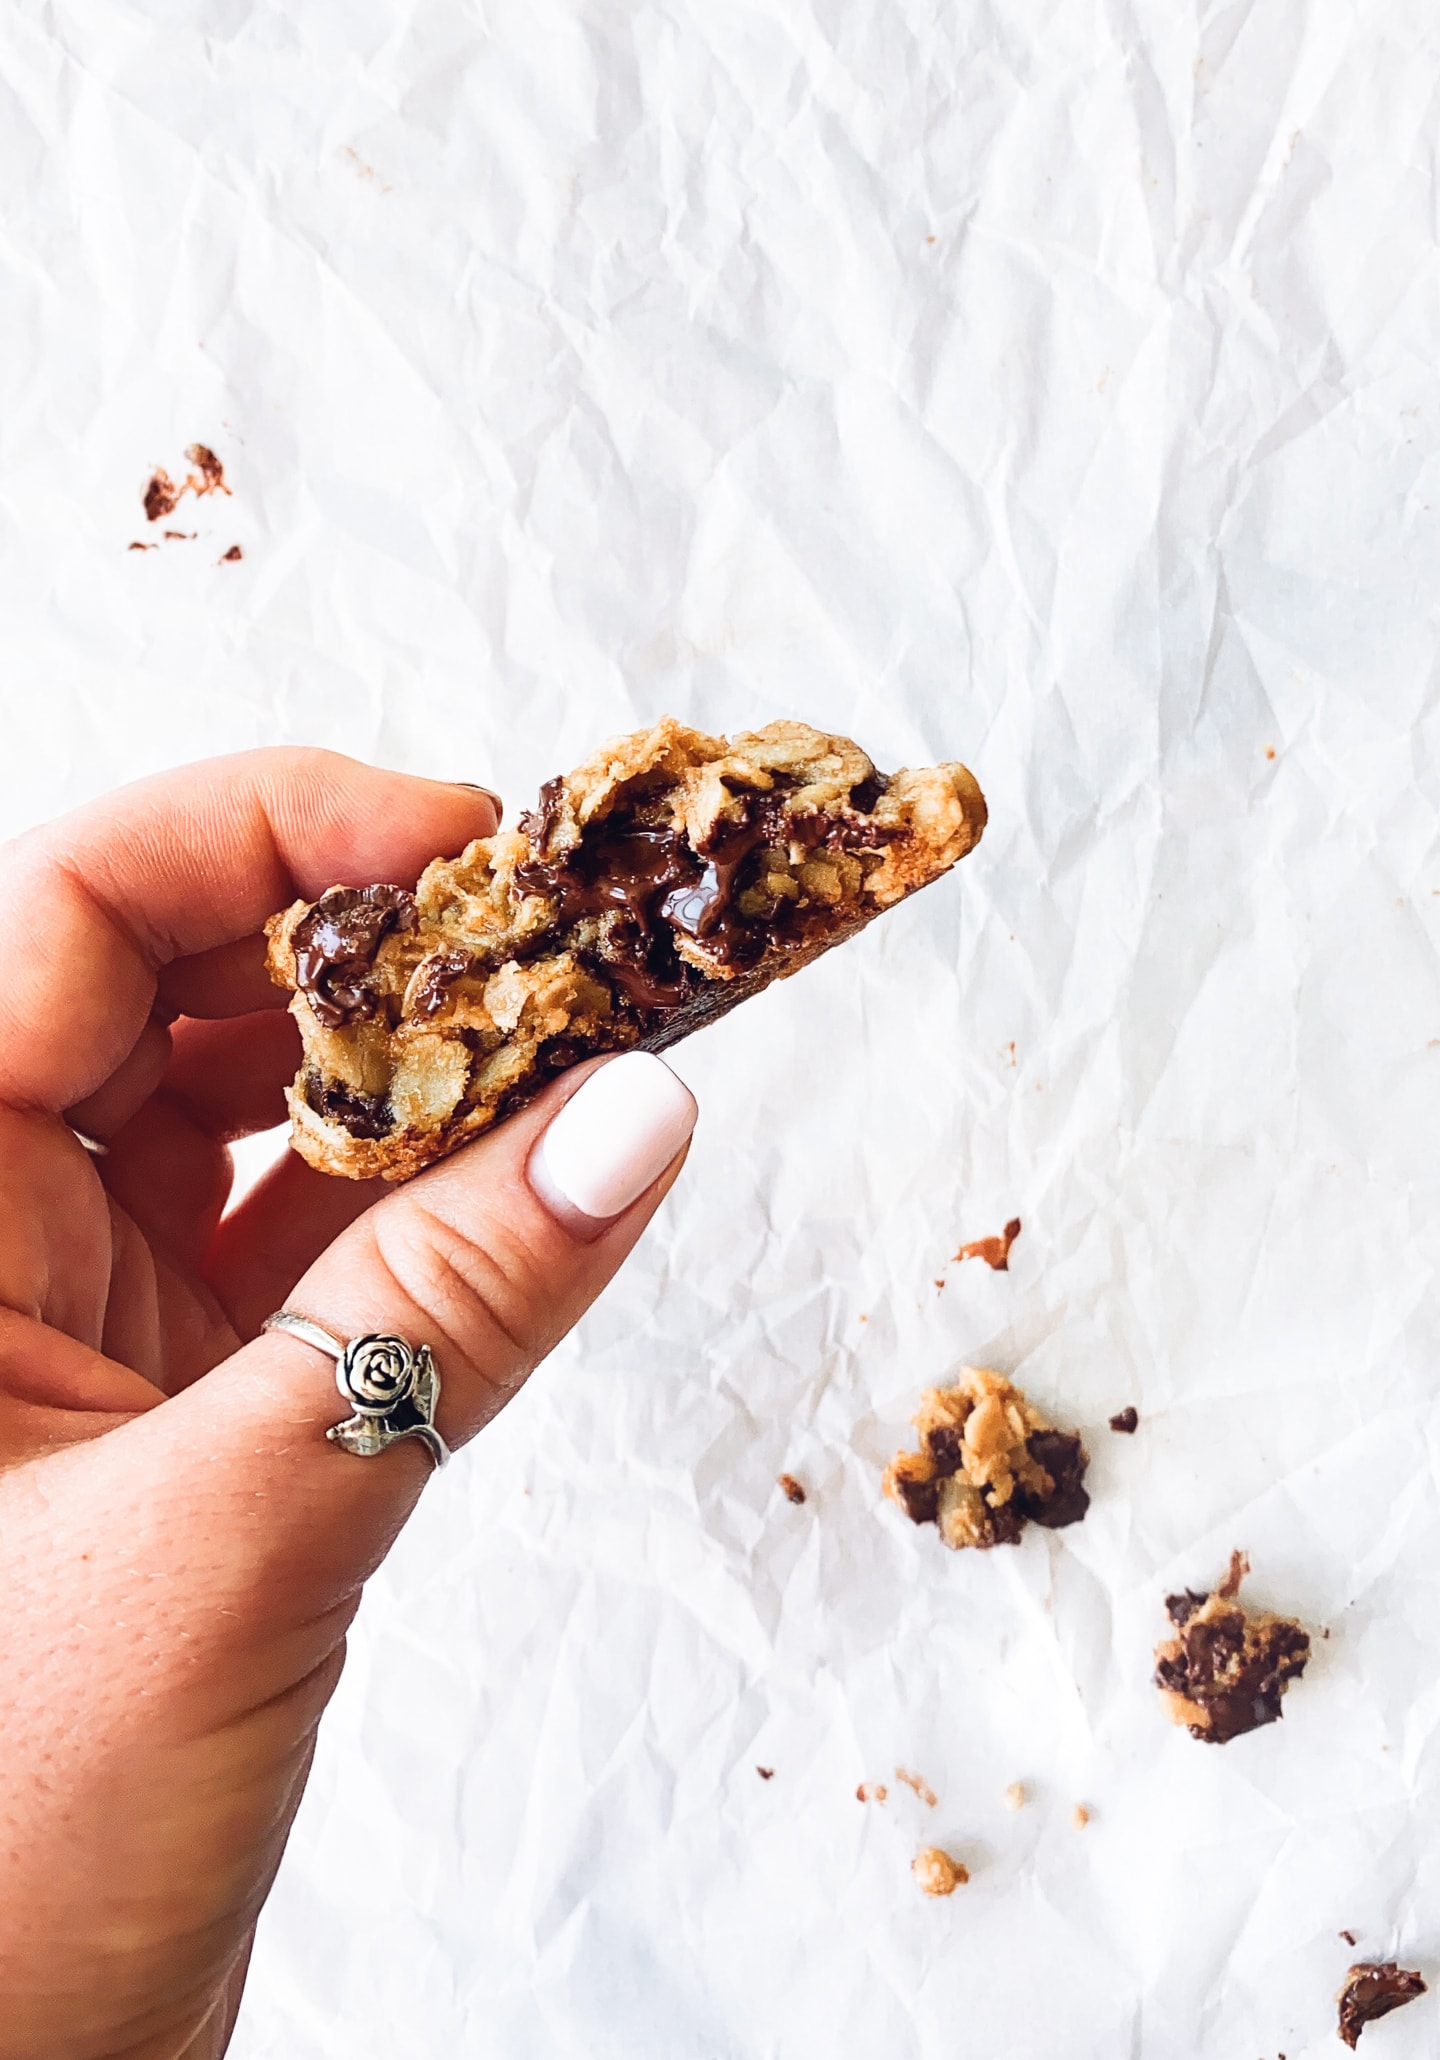 Female hand holding half of a gluten-free Oatmeal Chocolate Chip Cookie over a crinkled sheet of white parchment paper, with cookie crumbs below.